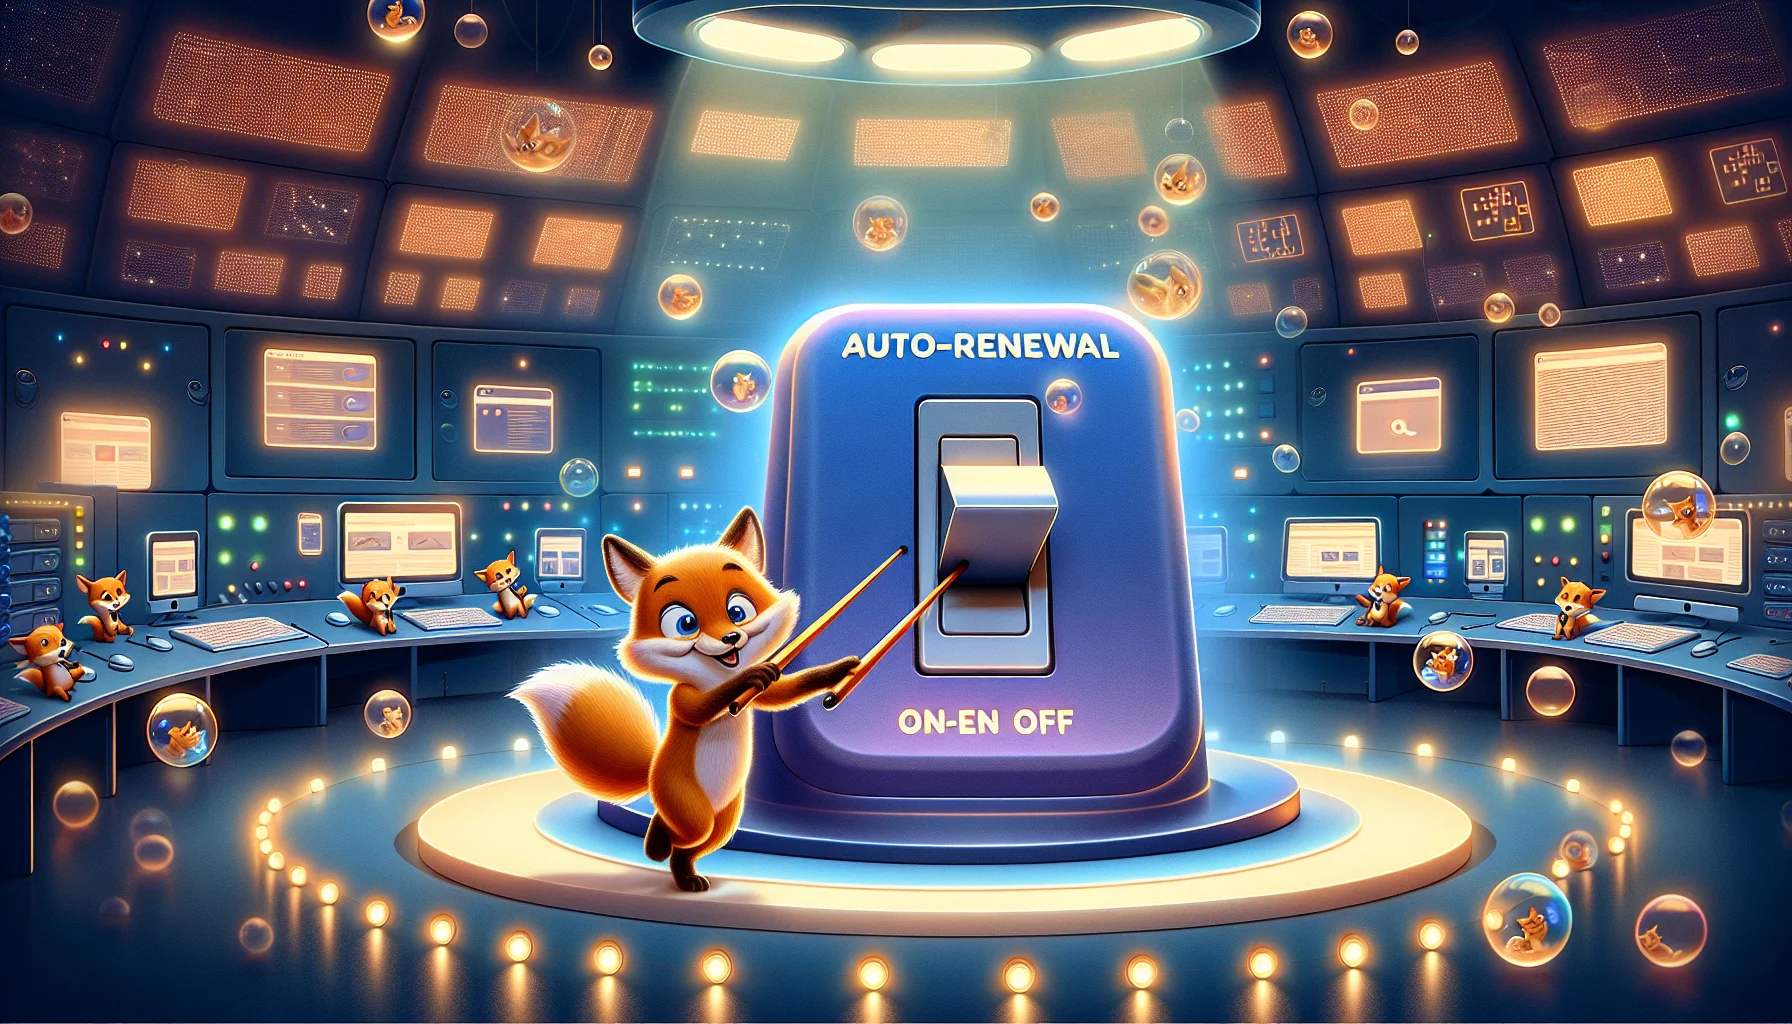 Design a humor-filled scenario where an animated joyful character, be it a playful fox, is flipping a gigantic switch marked 'Auto-Renewal' in the 'OFF' position. The switch is located in the center of a grand, digital control room filled with vibrant lights and futuristic details, representing a web hosting company. Also, integrate the atmosphere with softly glowing screens displaying some lively websites indicating its hosting purpose. Let's wrap up the scene with a comical relief element of seeing bubbles containing smaller versions of the same switch floating around in the background with tiny anthropomorphic woodland creatures turning them off.